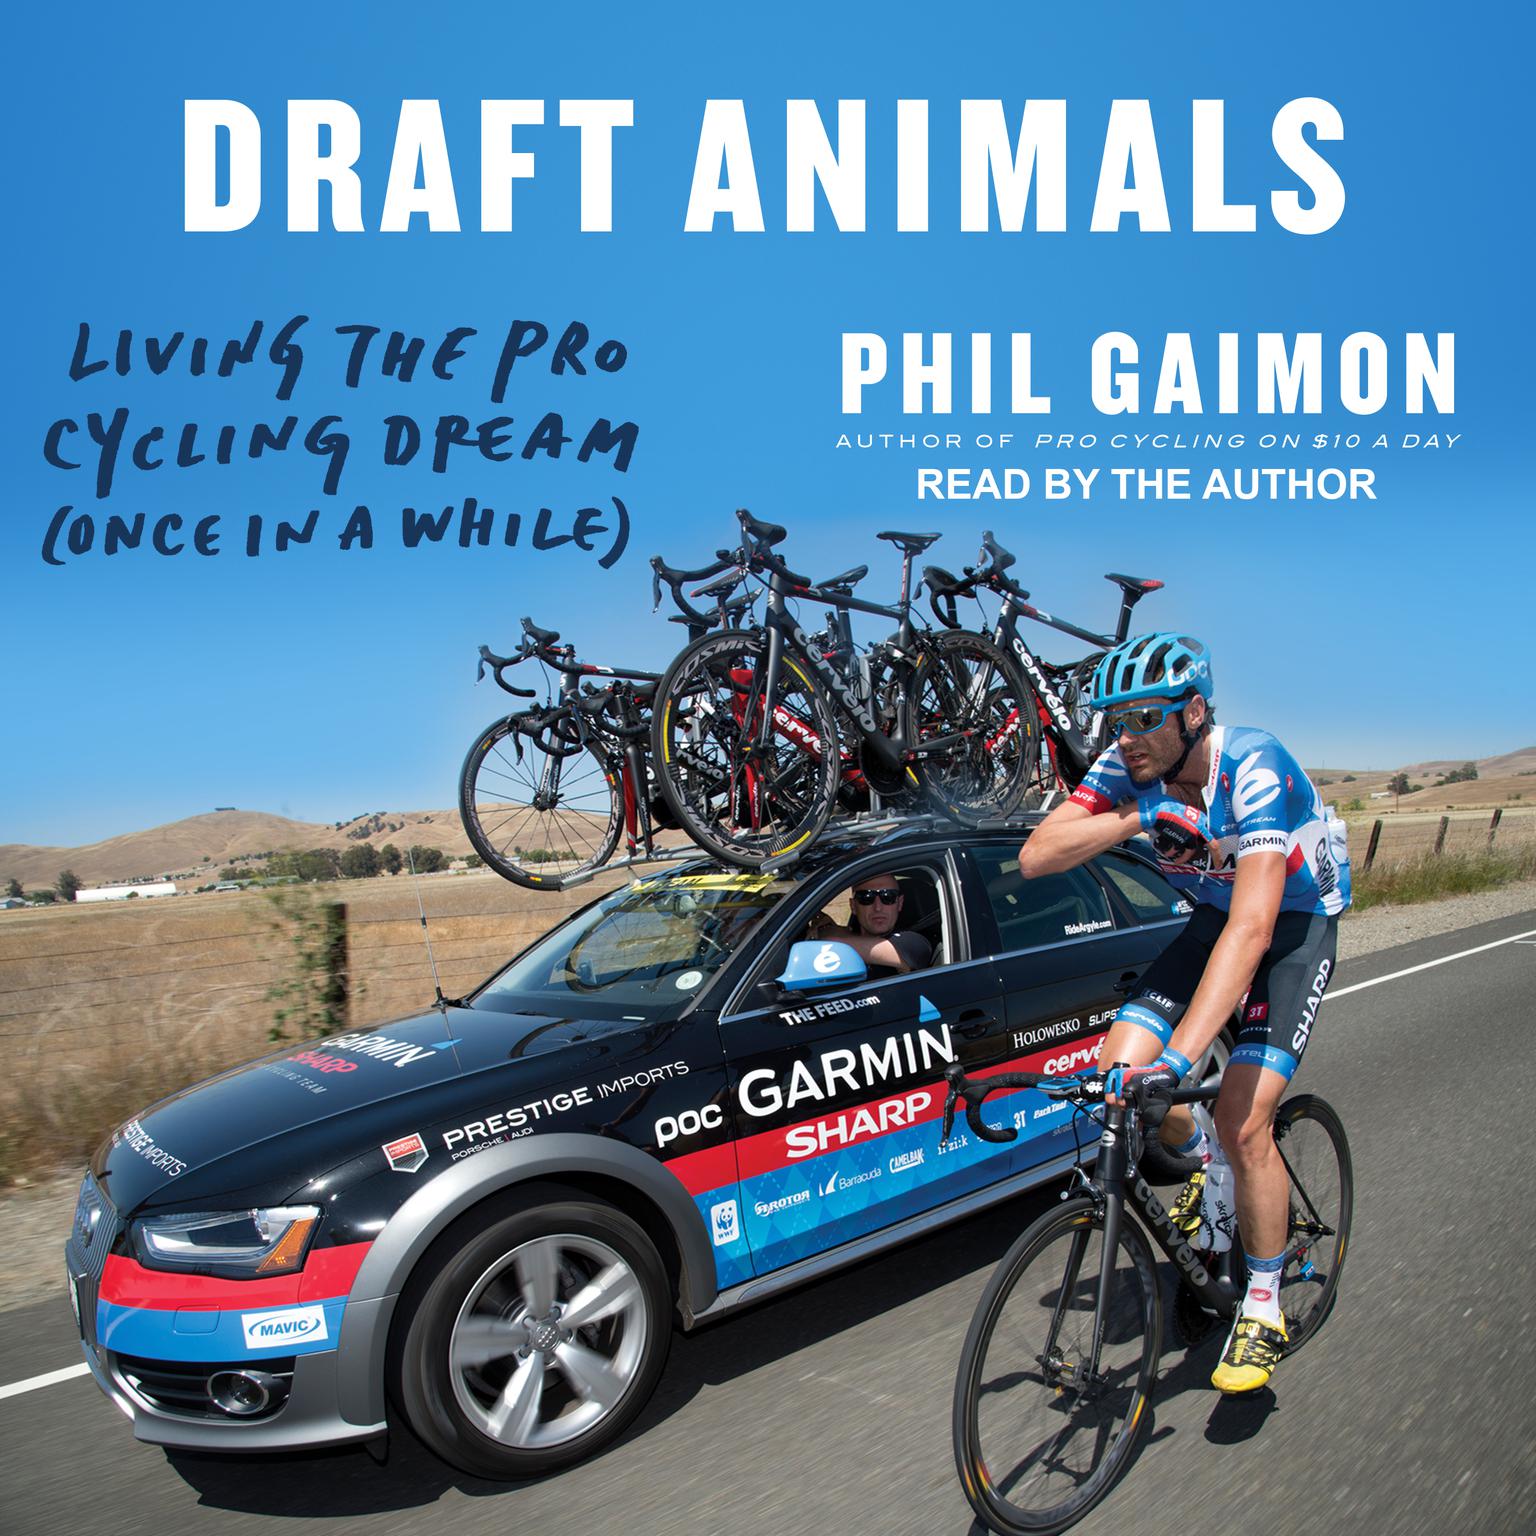 Draft Animals: Living the Pro Cycling Dream (Once in a While) Audiobook, by Phil Gaimon